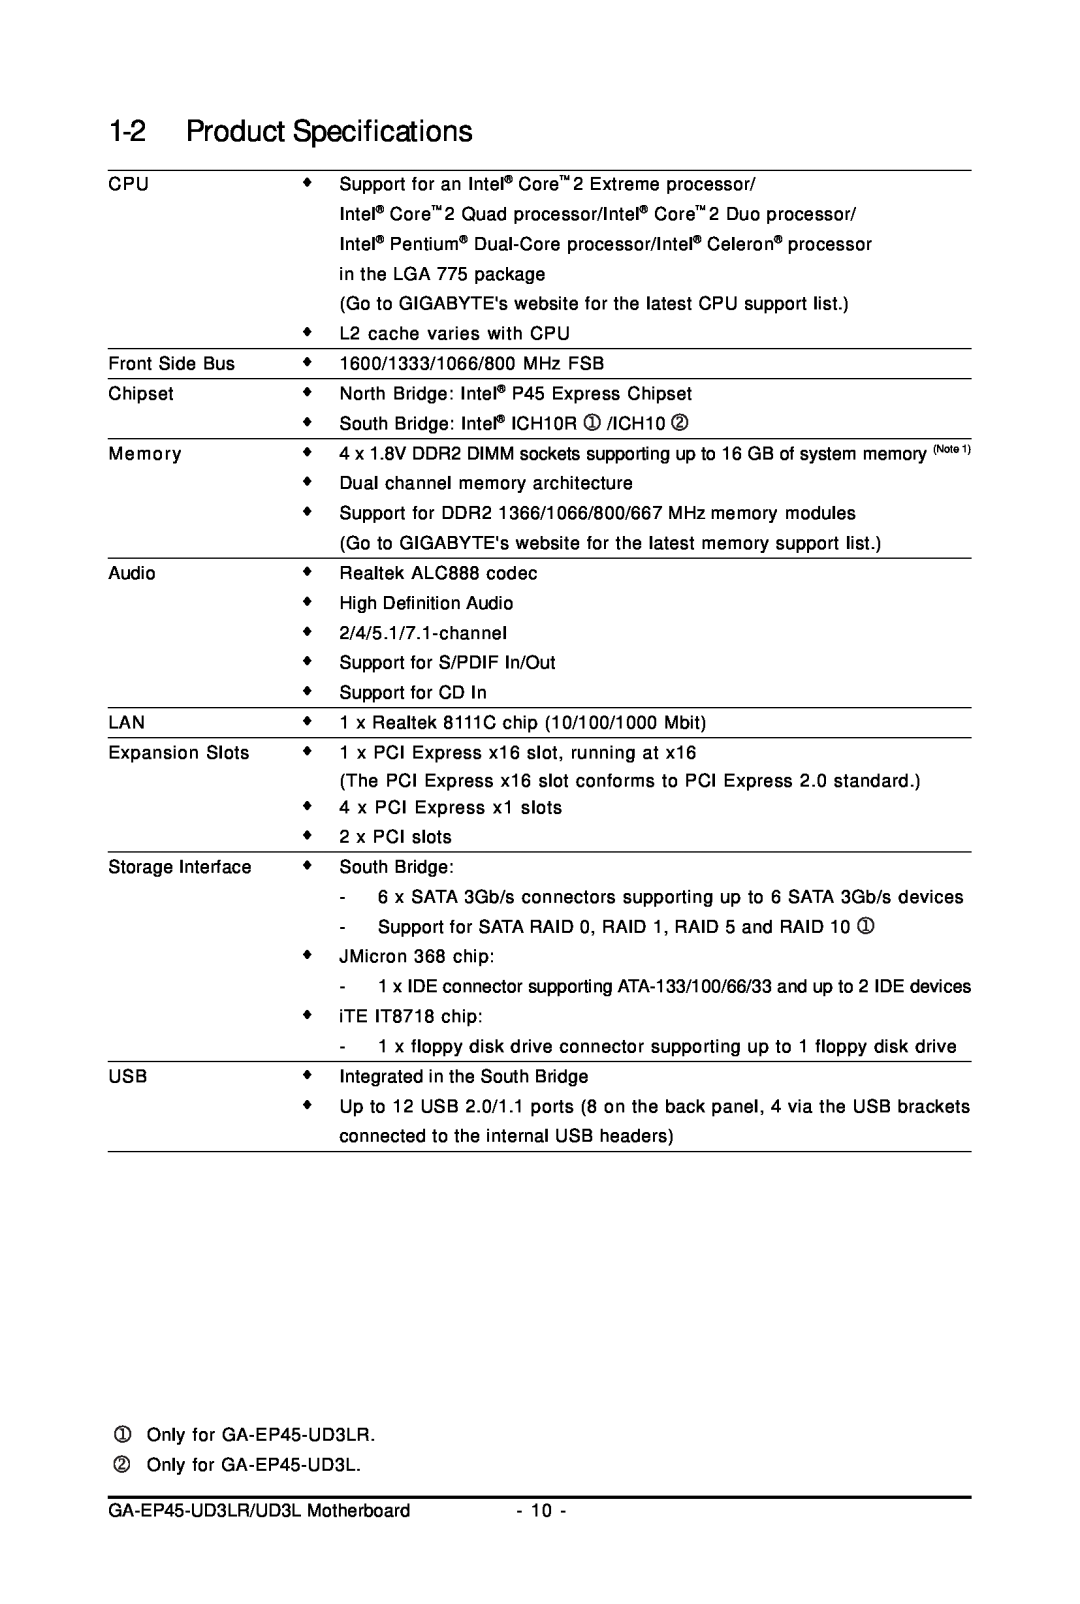 Gigabyte GA-EP45-UD3LR user manual Product Specifications, The PCI Express x16 slot conforms to PCI Express 2.0 standard 